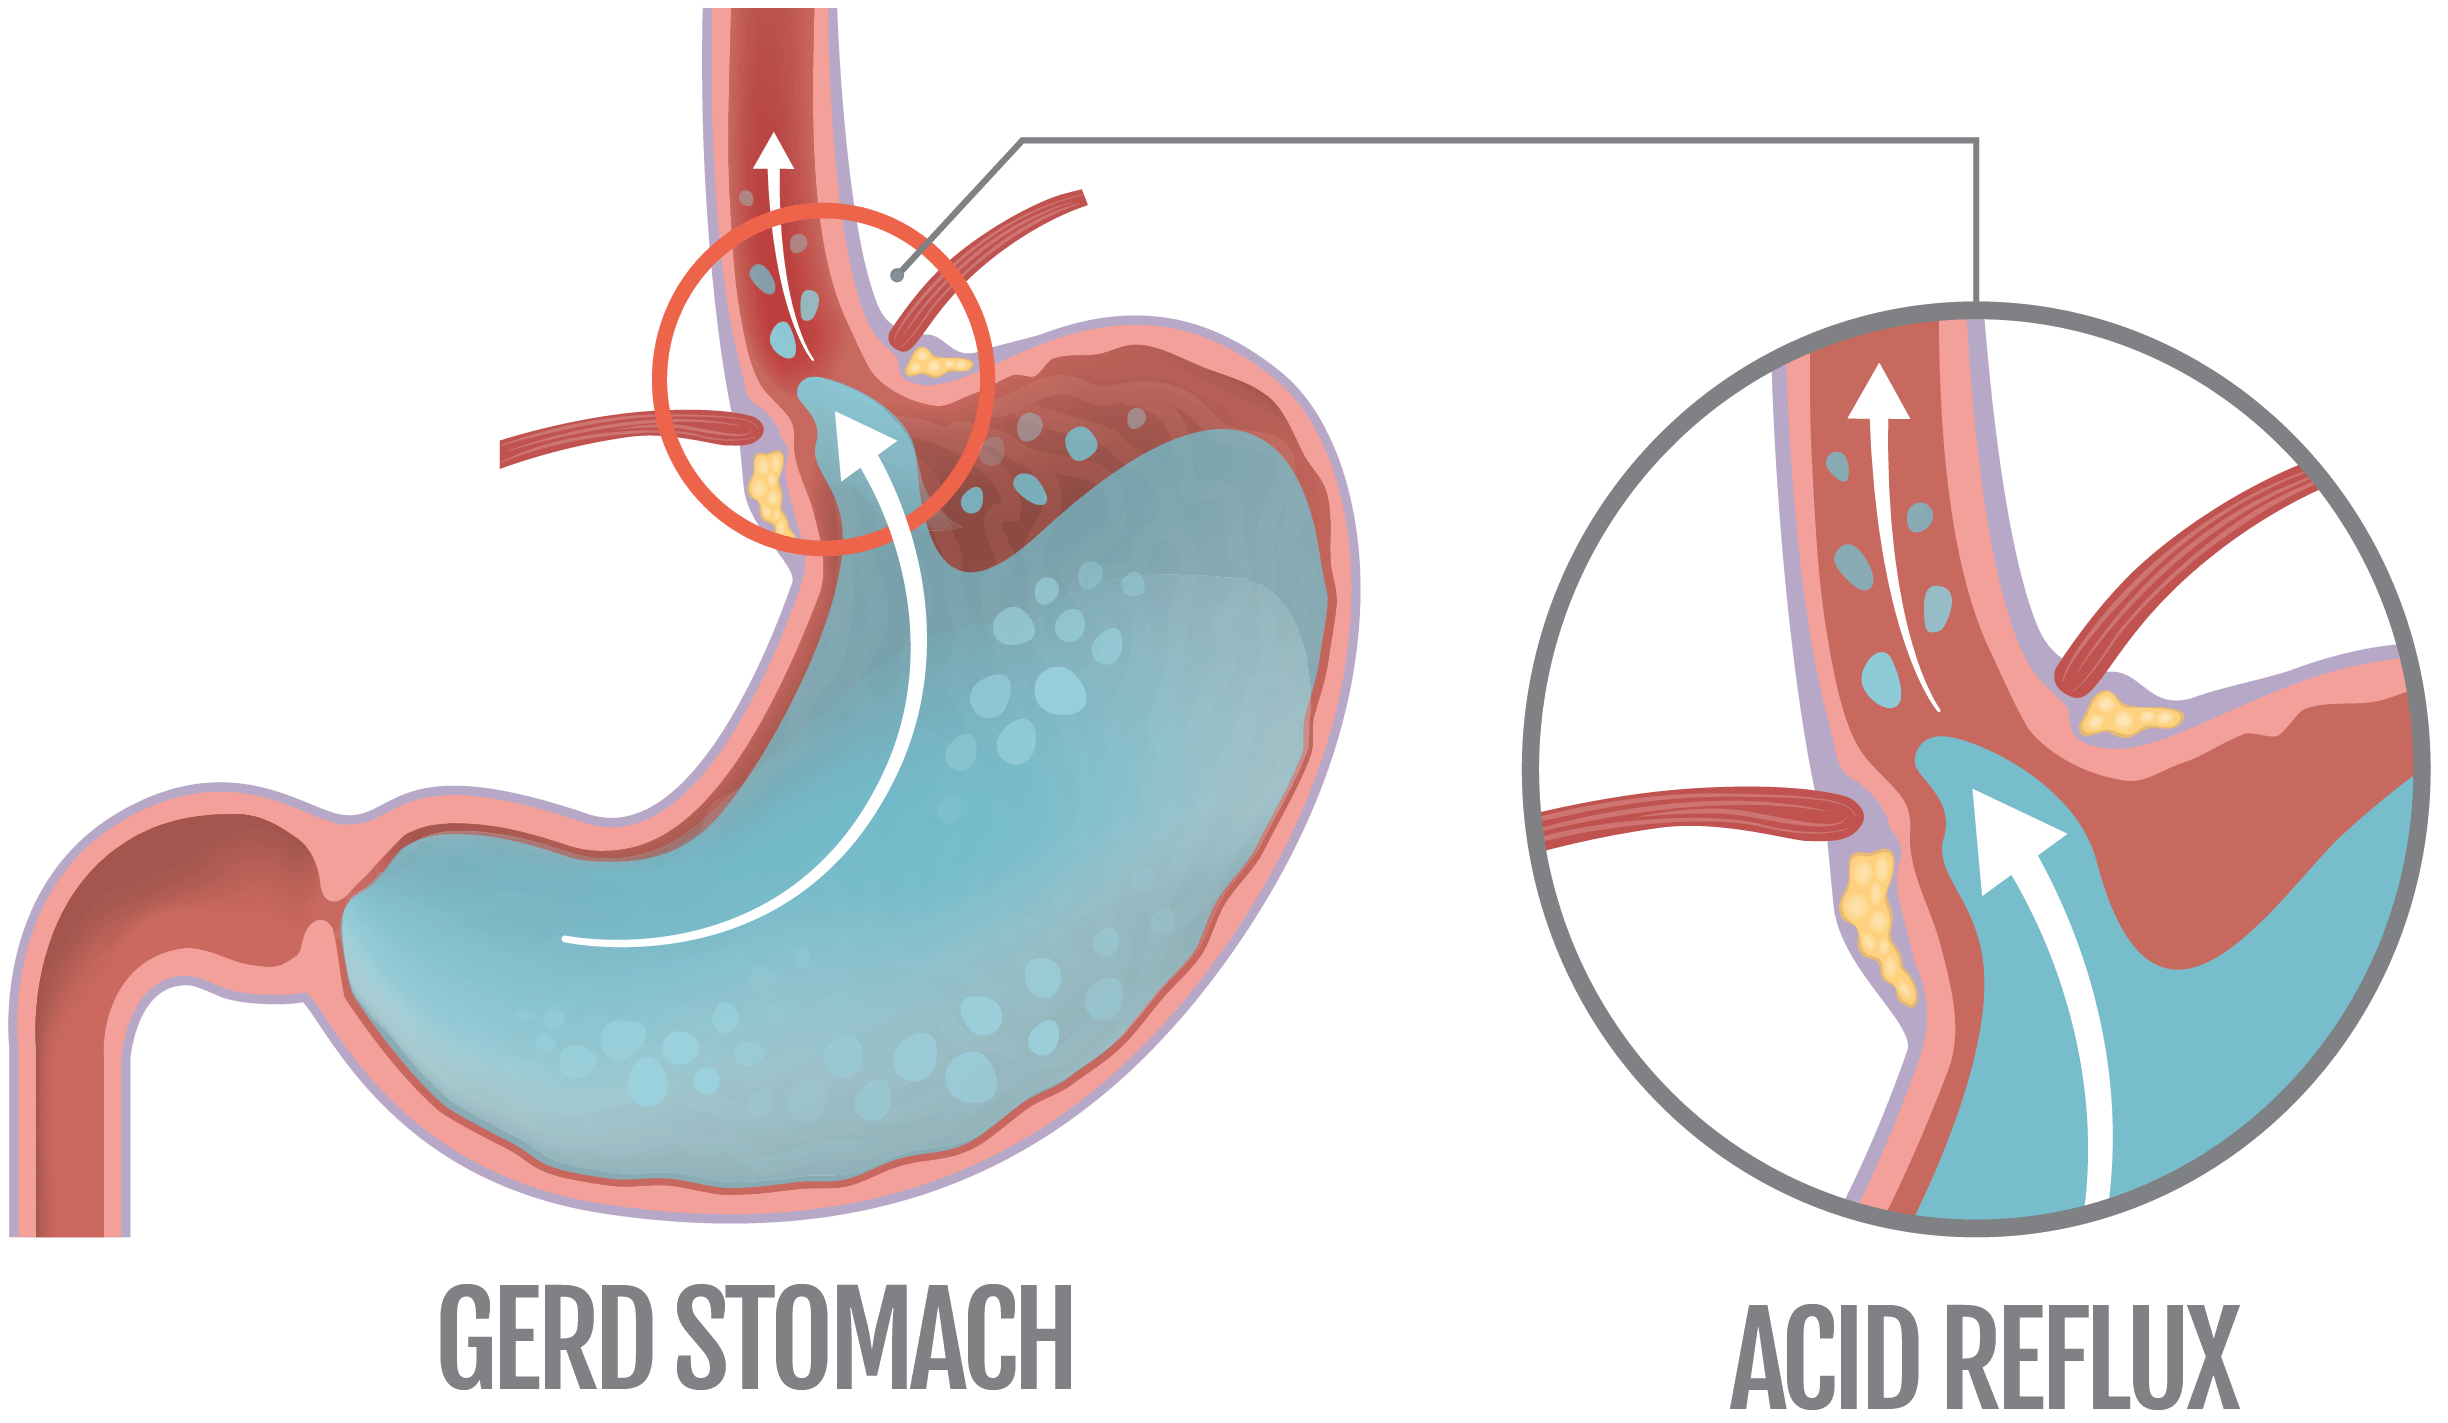 Acid Reflux and GERD stomach